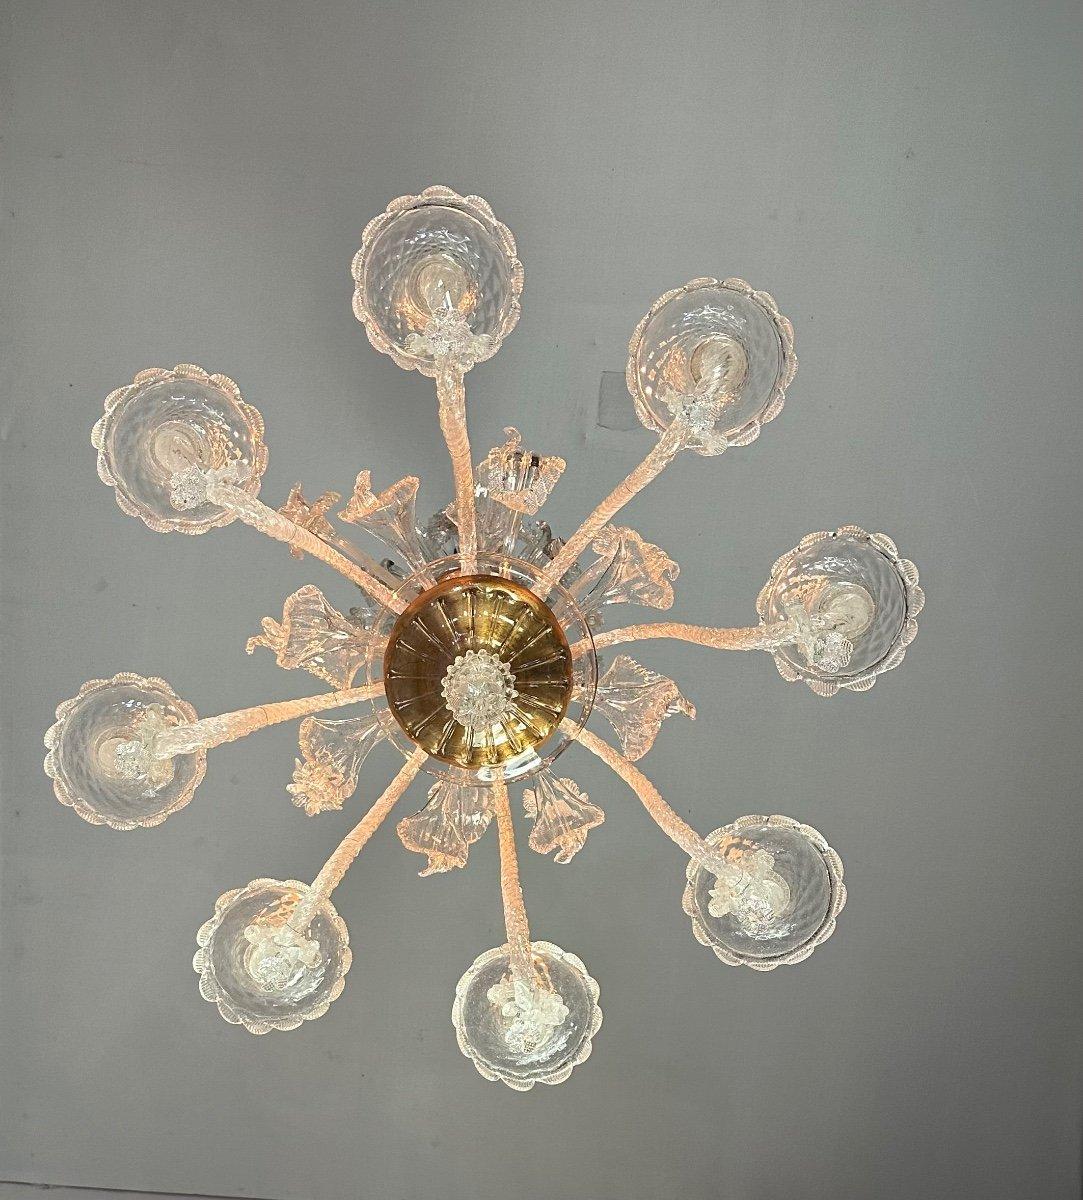 Colorless Murano Glass Chandelier 8 Arms Of Light Circa 1890 For Sale 3